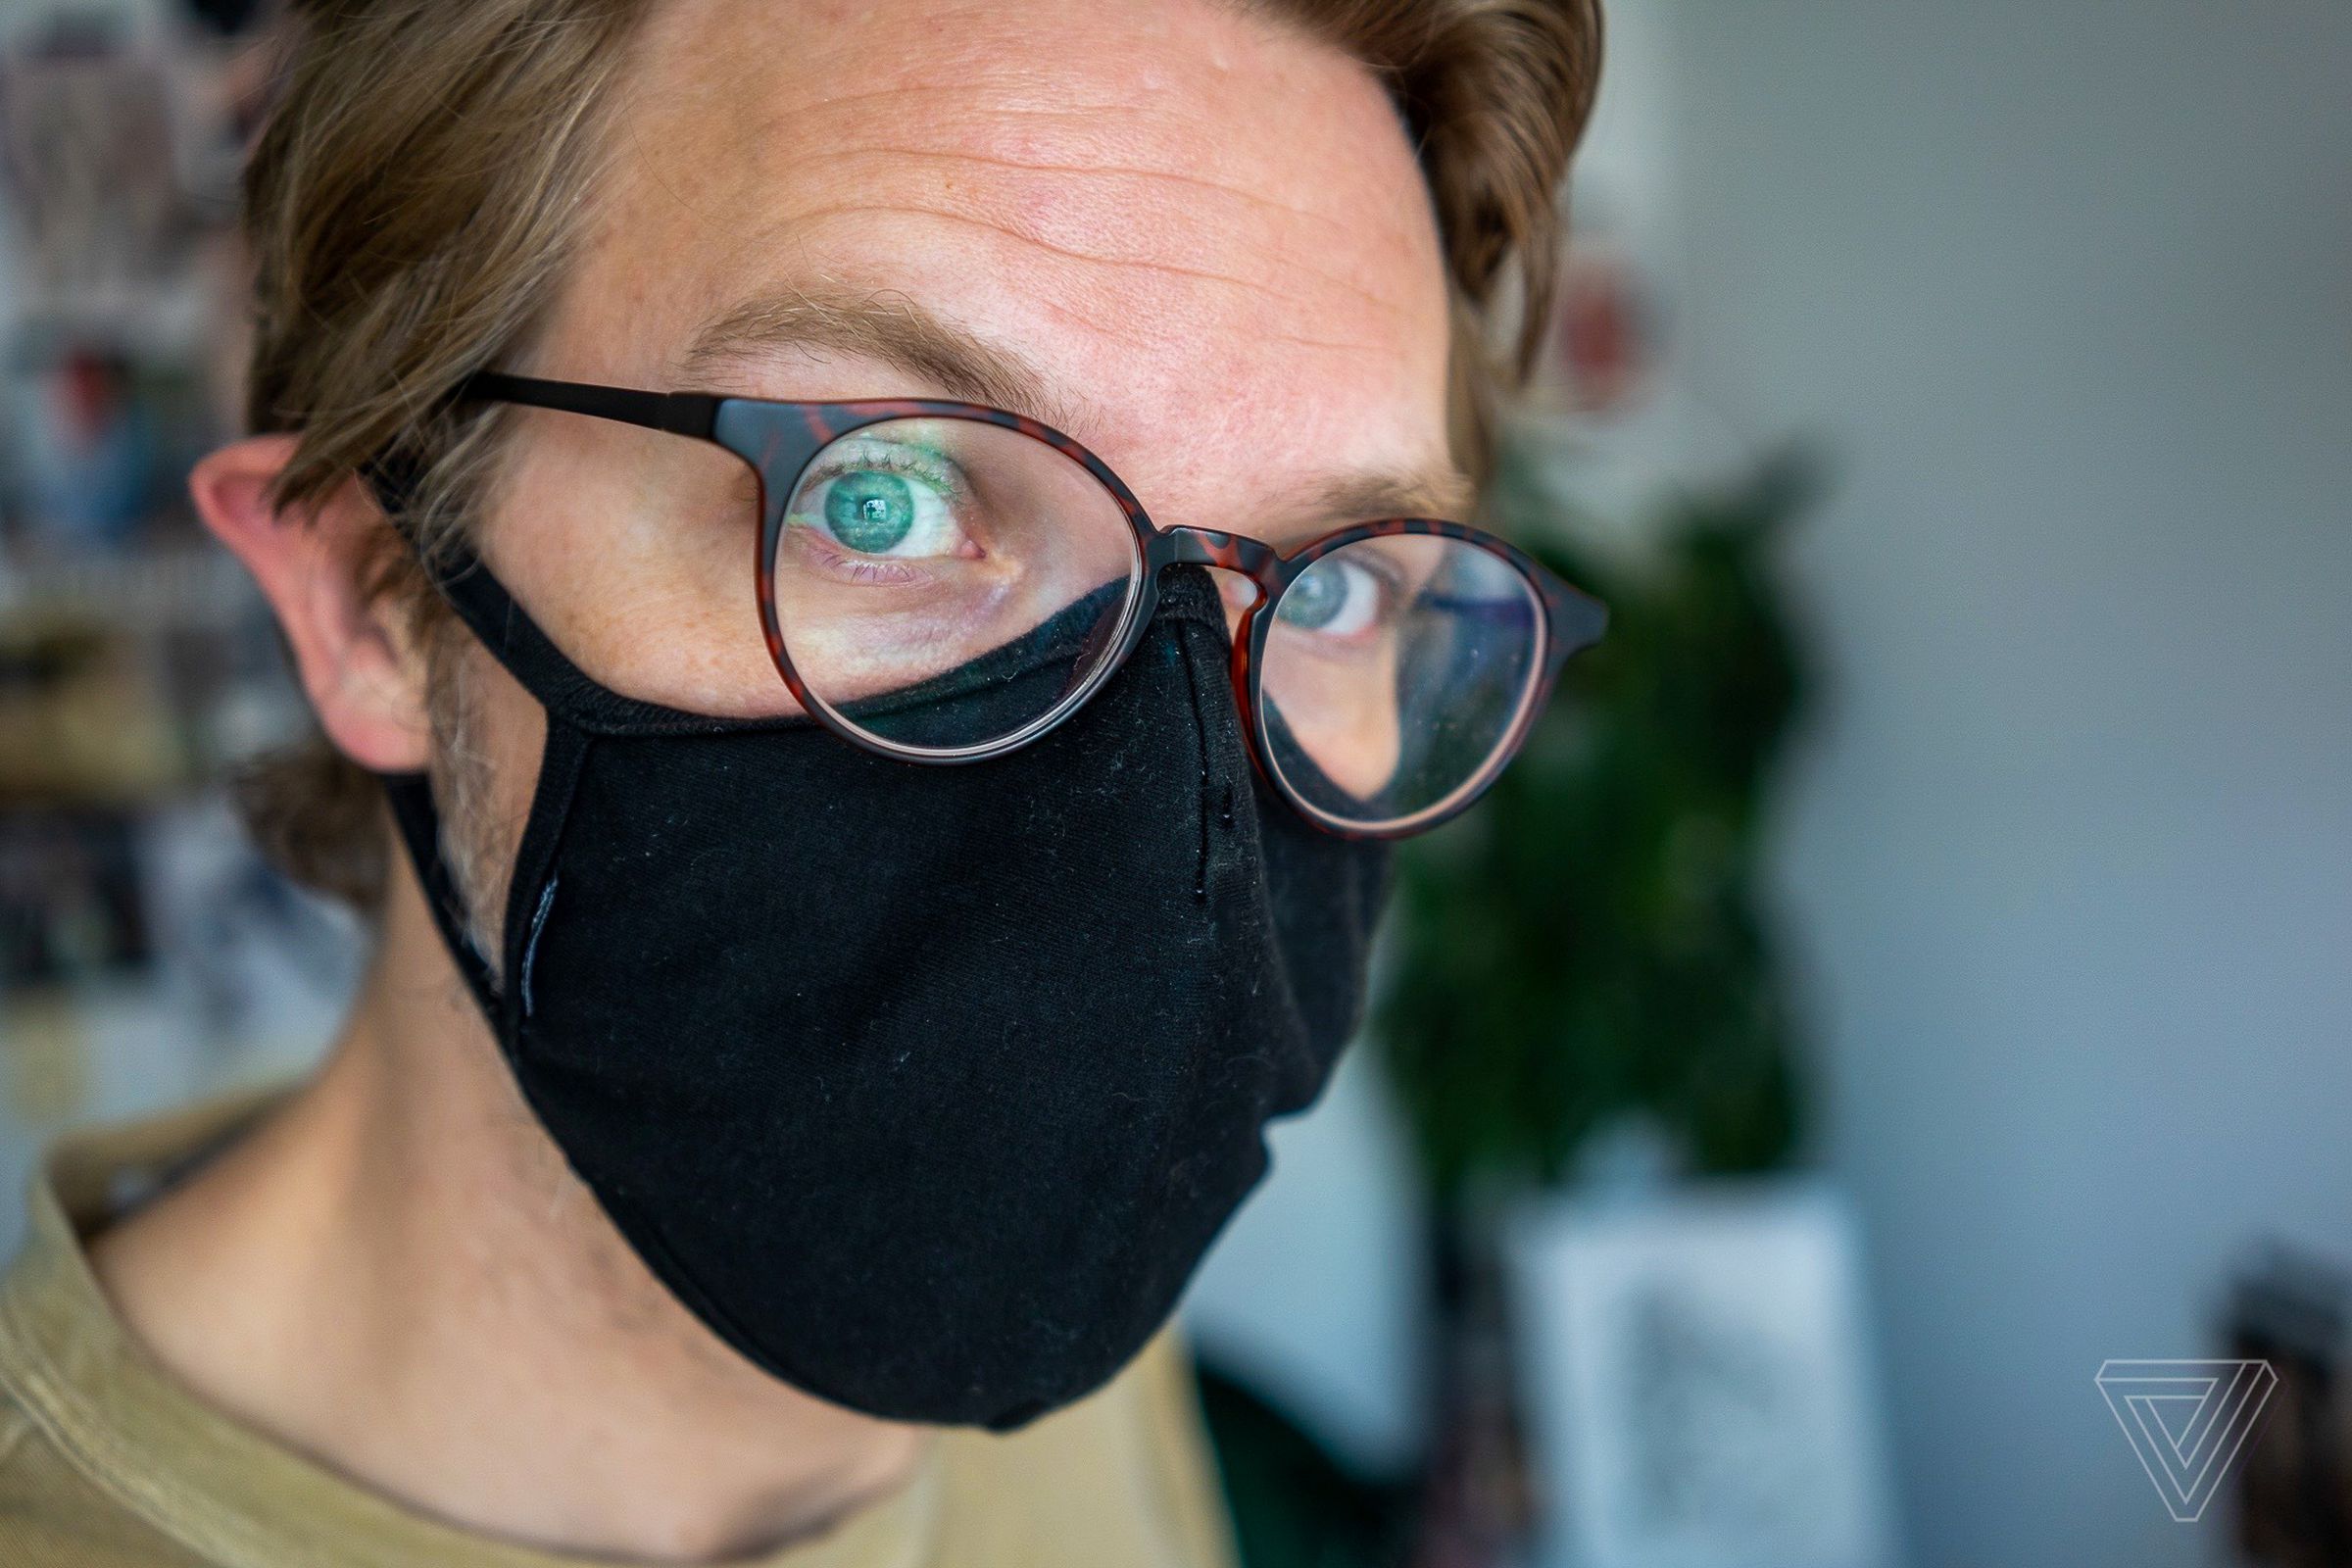 Putting your glasses on over your mask can prevent fogging.